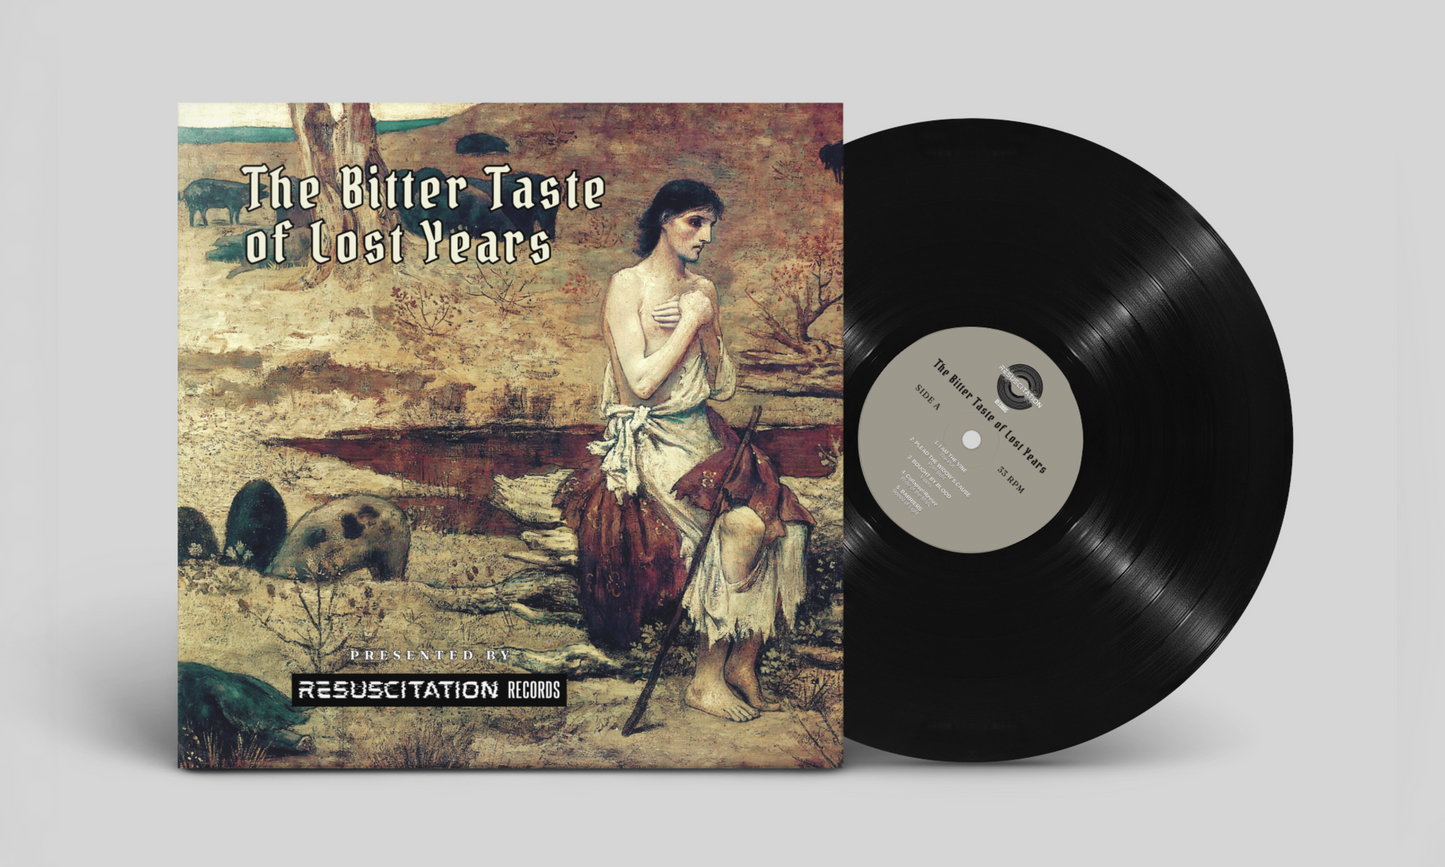 The Bitter Taste of Lost Years - Deluxe 12" LP + CD